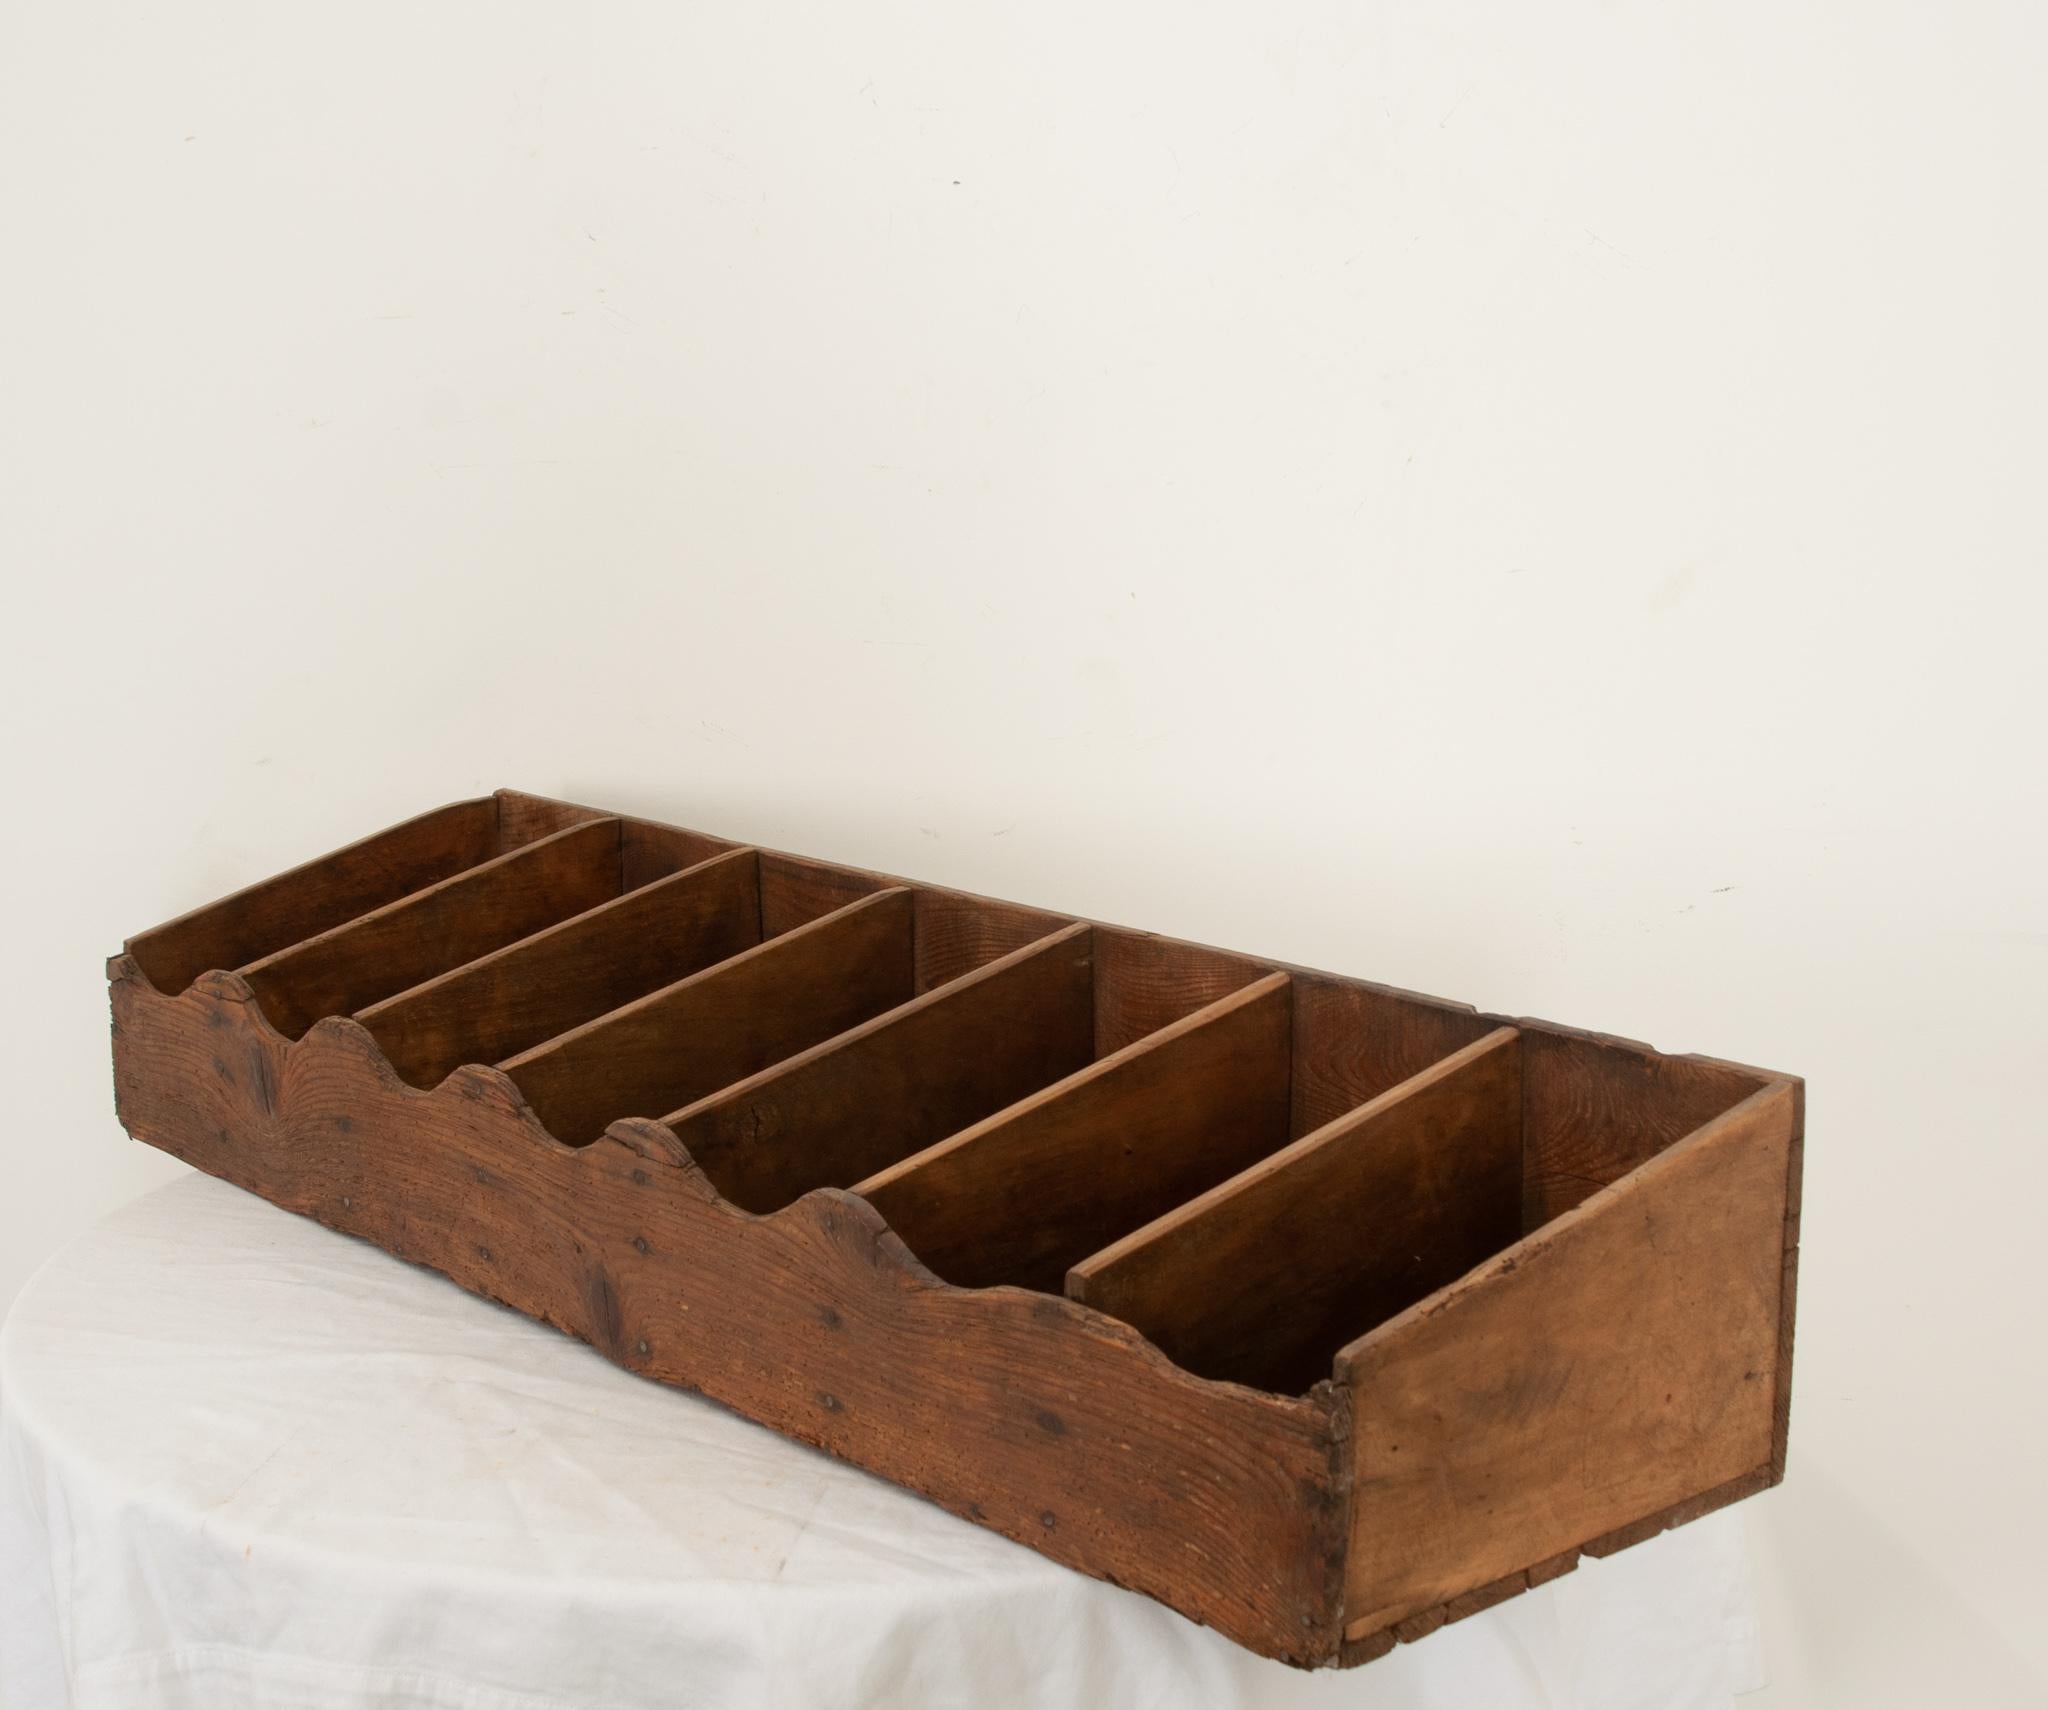 Crafted from solid oak in England, this freestanding divided display box was originally used for merchants to sell seeds or other smaller objects. From organizing utensils to art supplies to spices- it’s wonderfully versatile. Many decades of use